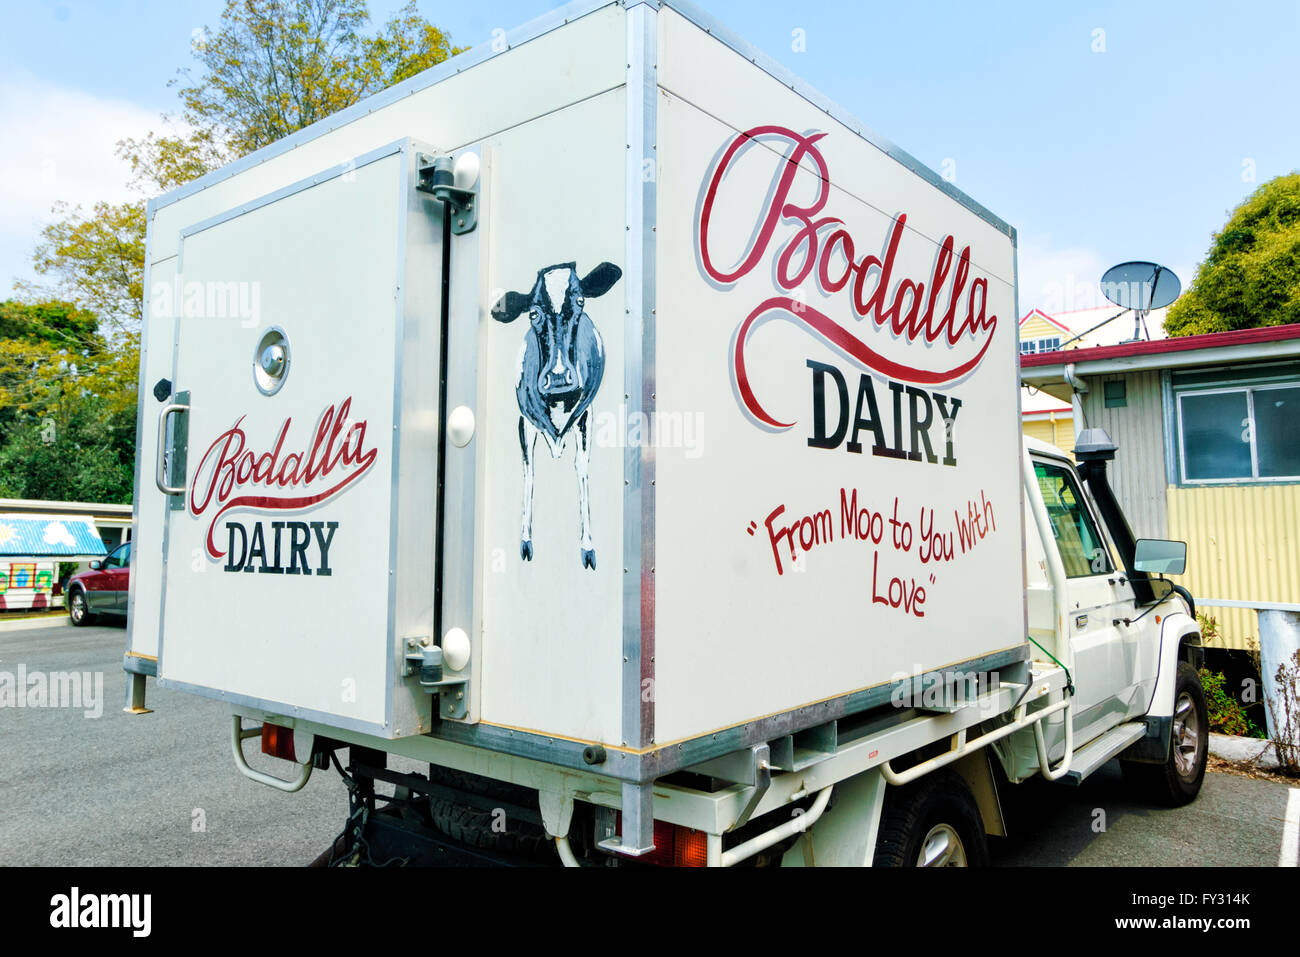 Funny Slogan on the Bodalla Dairy Delivery Van, New South Wales, Australia Stock Photo